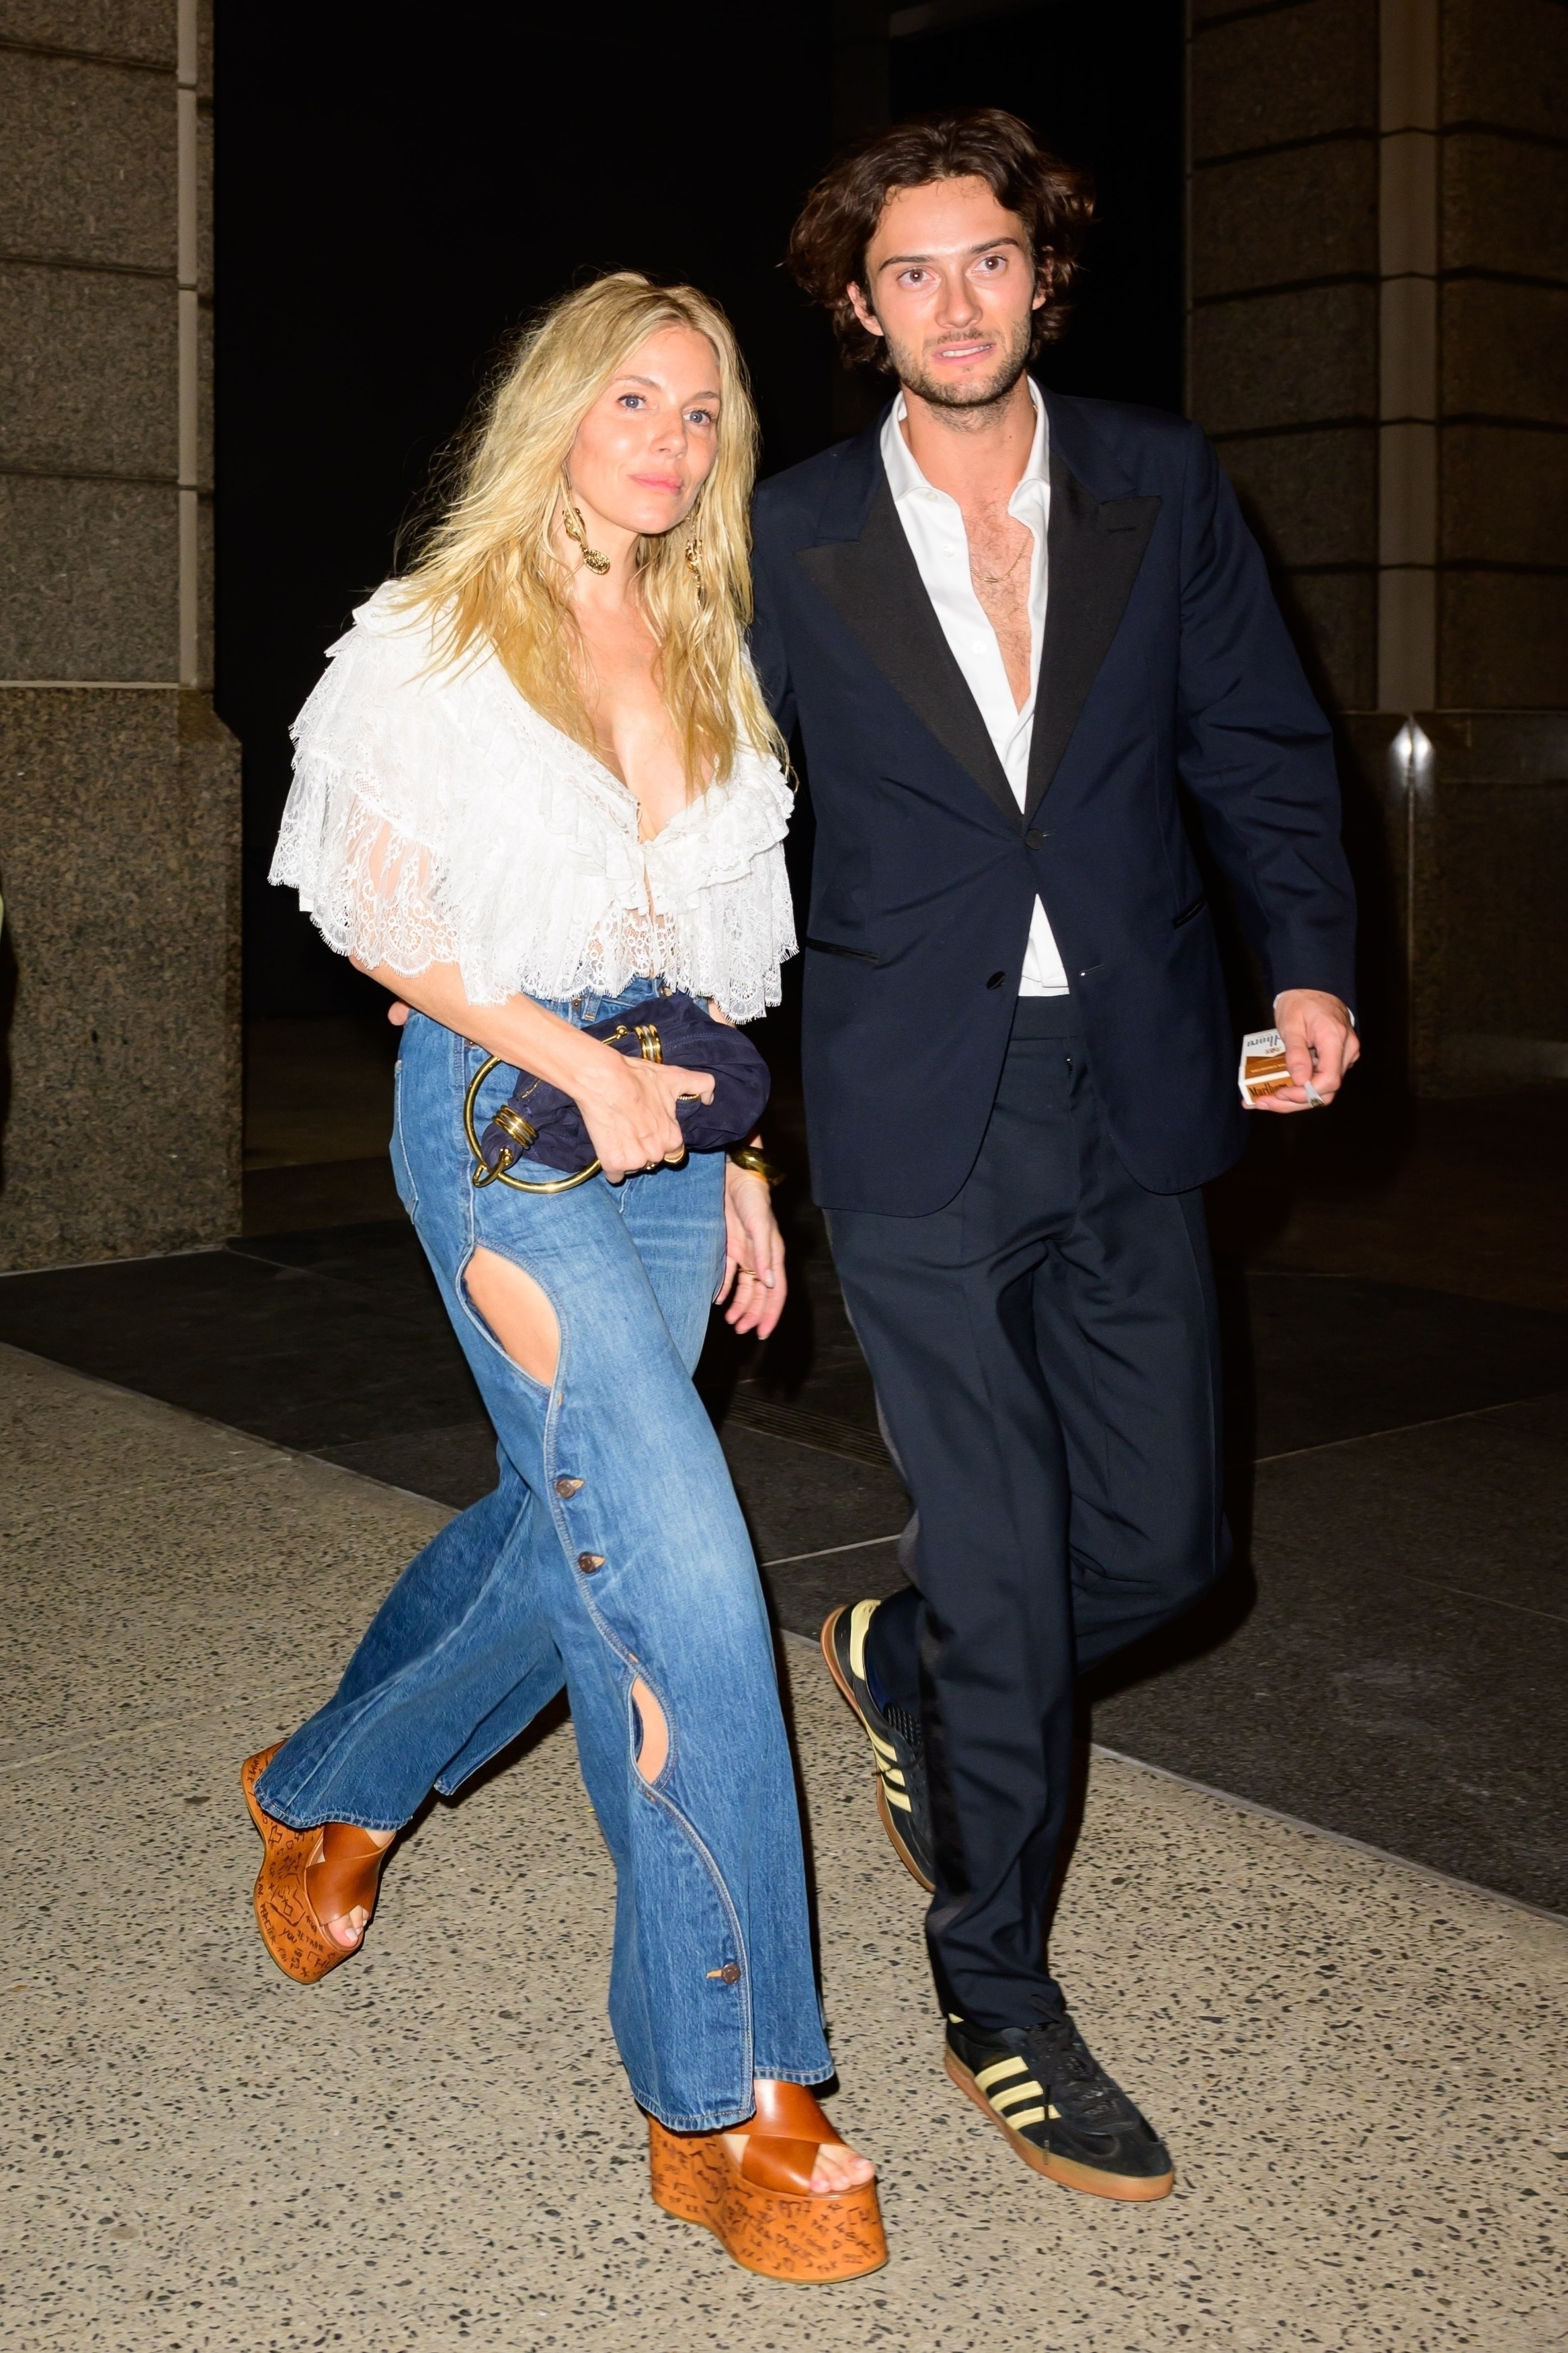 Two people walking, man in a suit holding a drink, woman in a white blouse and jeans